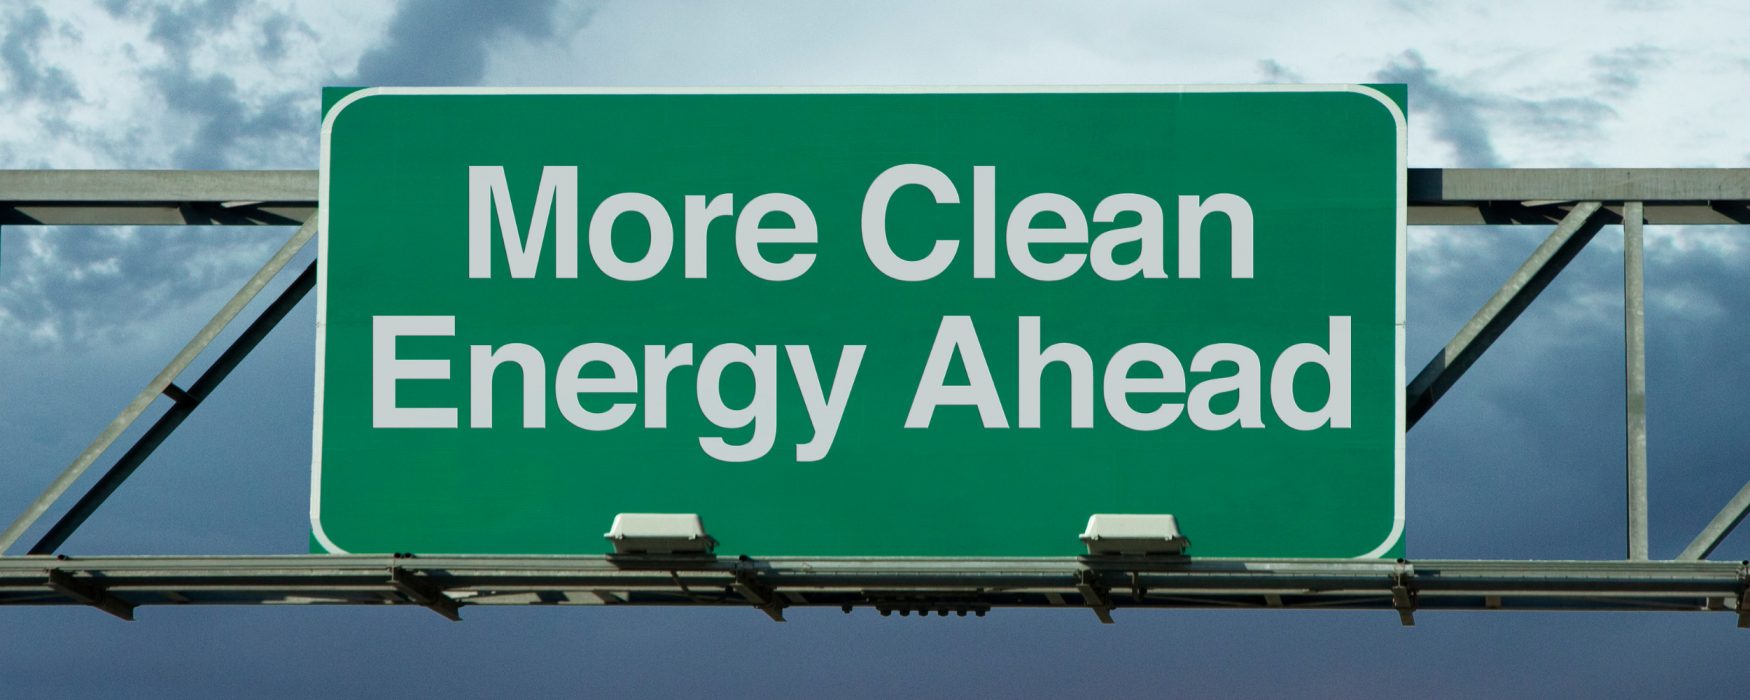 Image of an overhead road sign with the words "More Clean Energy Ahead" printed on it